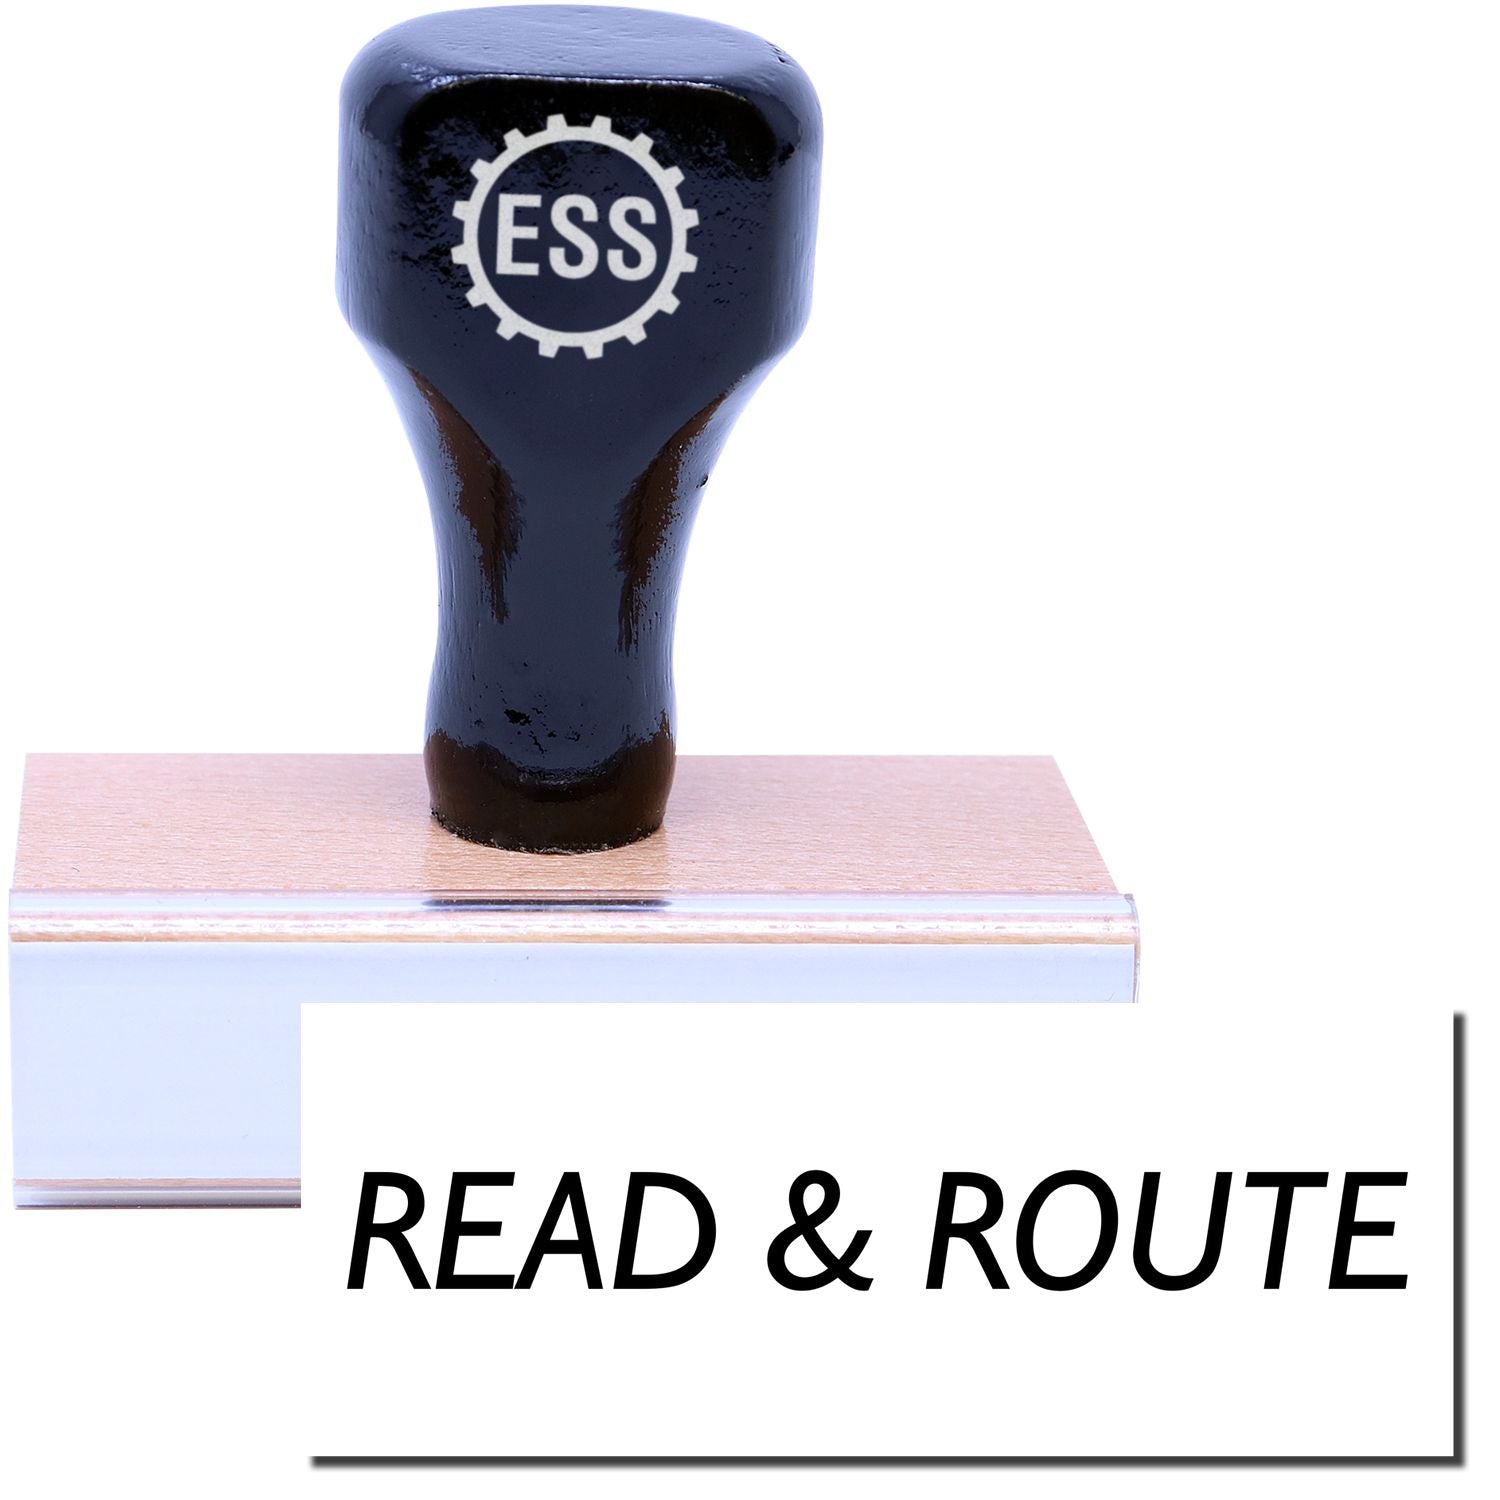 A stock office rubber stamp with a stamped image showing how the text "READ & ROUTE" is displayed after stamping.